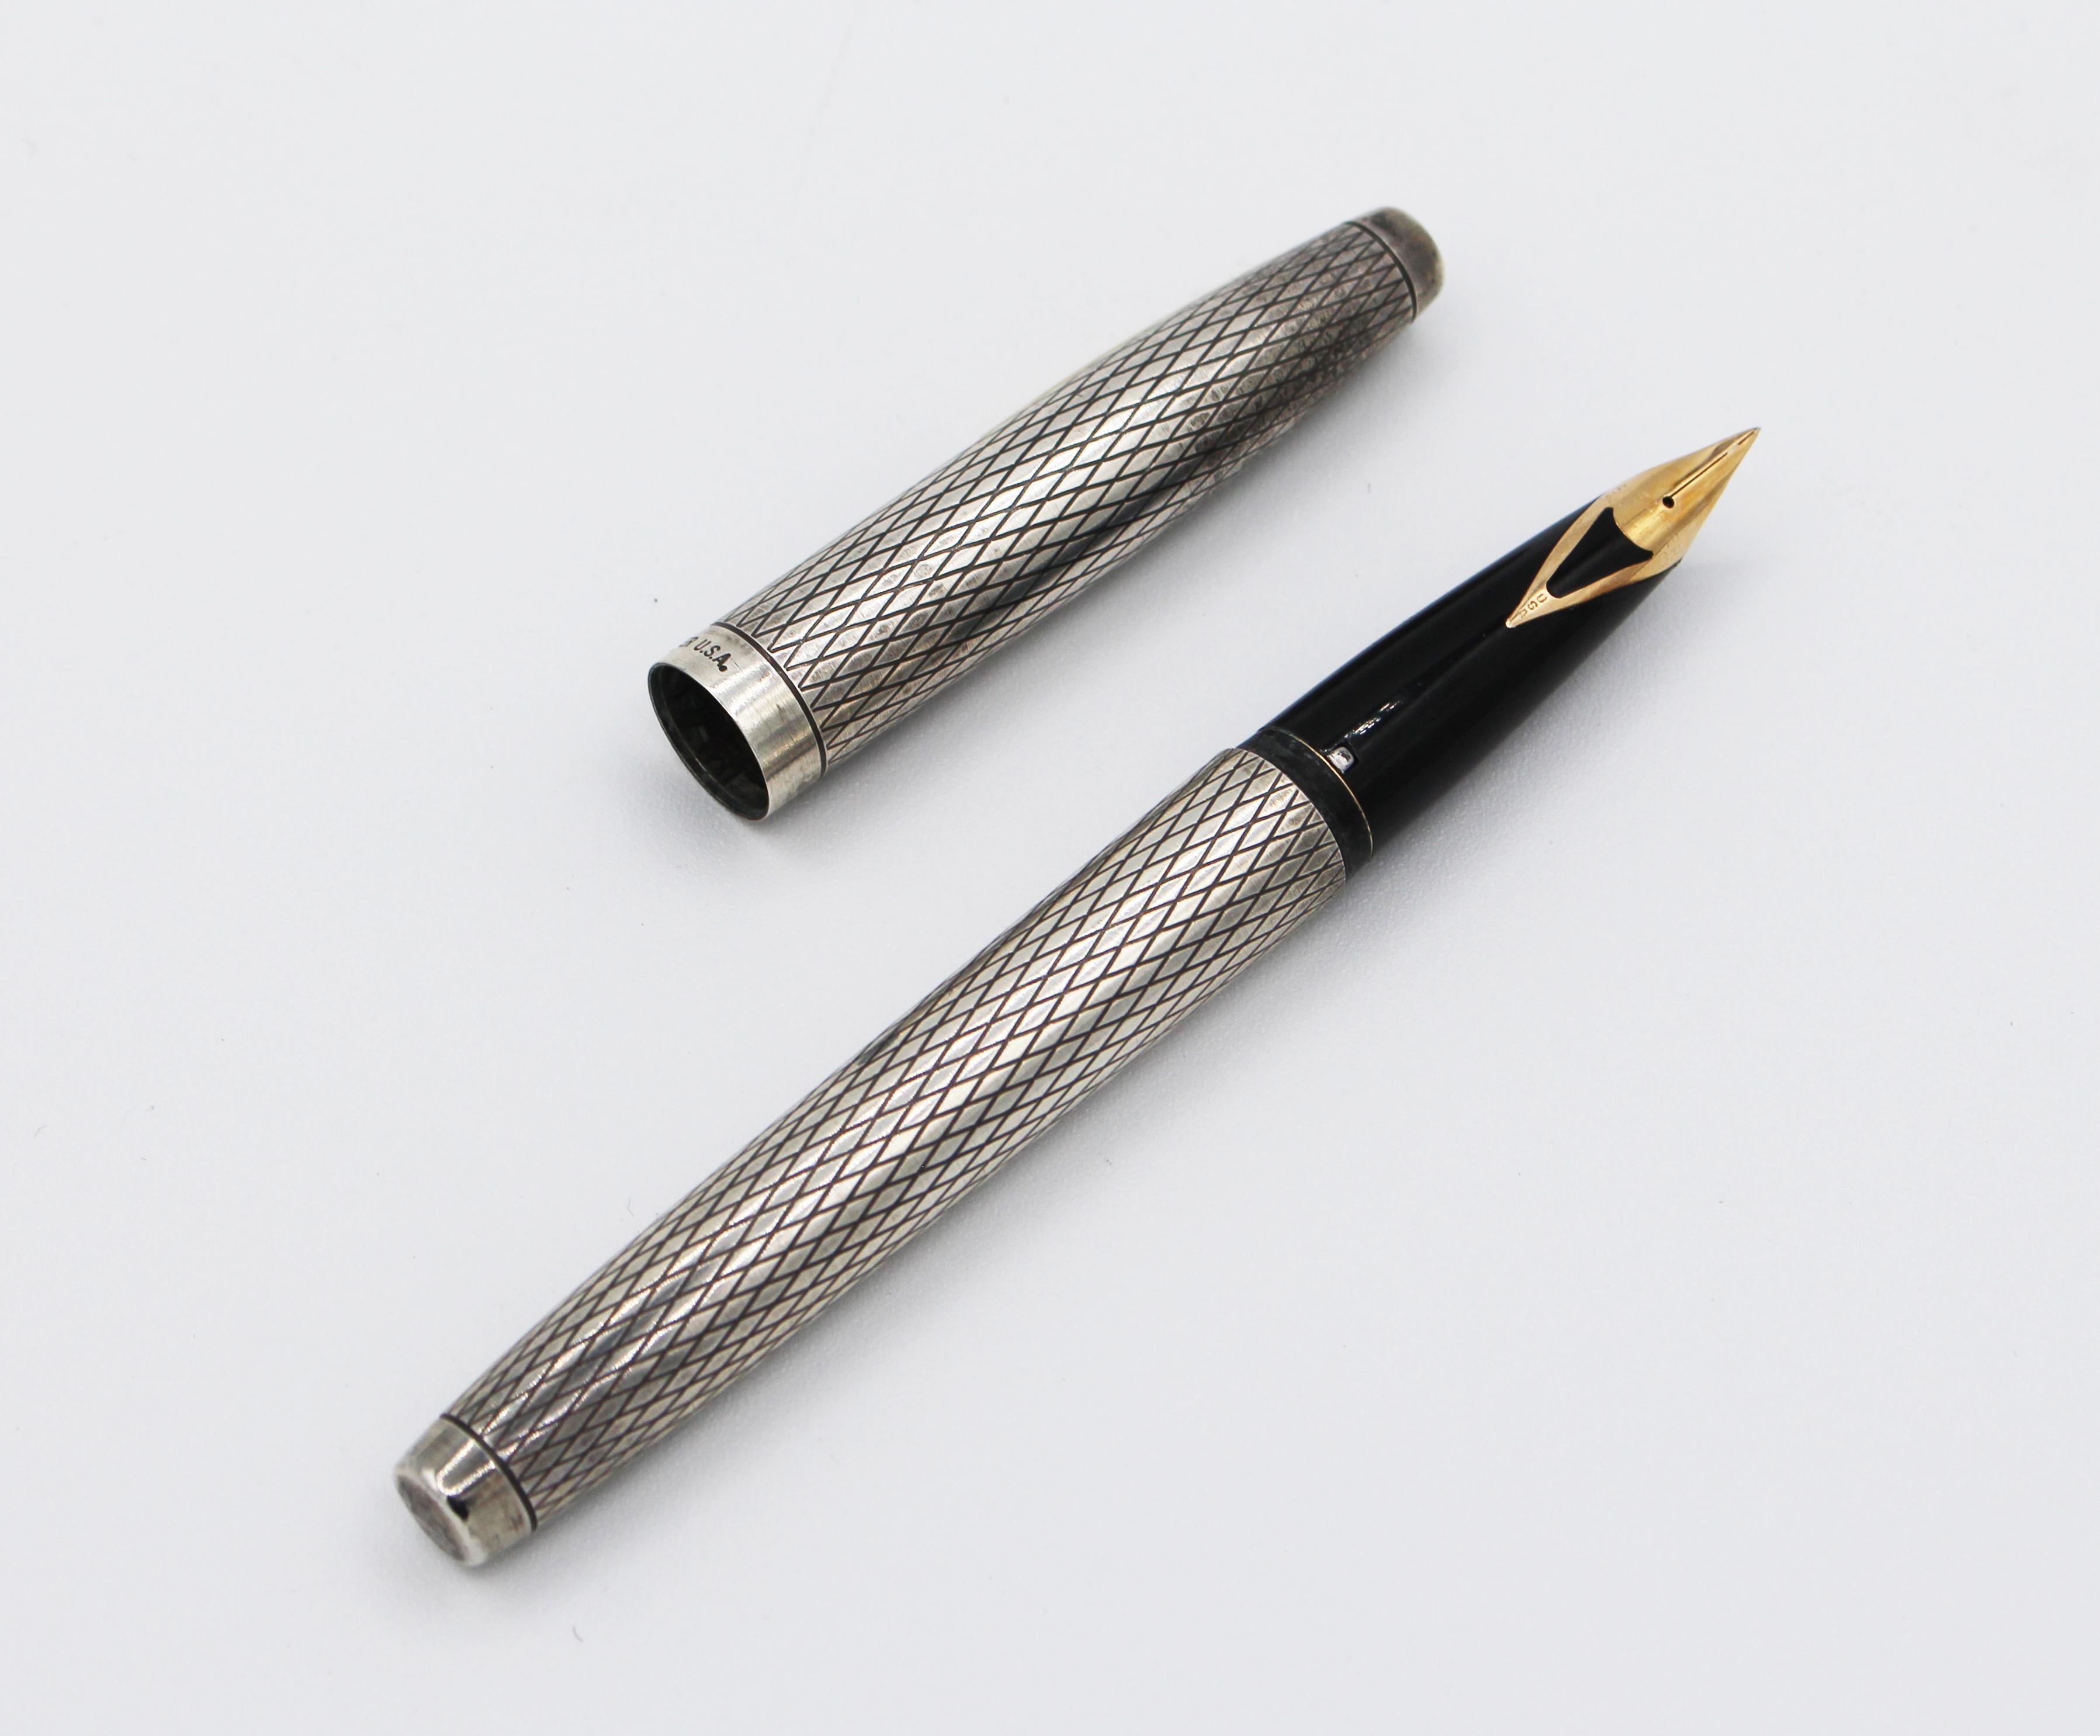 A Sheaffer Imperial fountain pen, sterling silver, 14k nib #585. USA. Diamond pattern, c.1970s. Normal wear commensurate with age and use. Crown insignia. 5 1/8